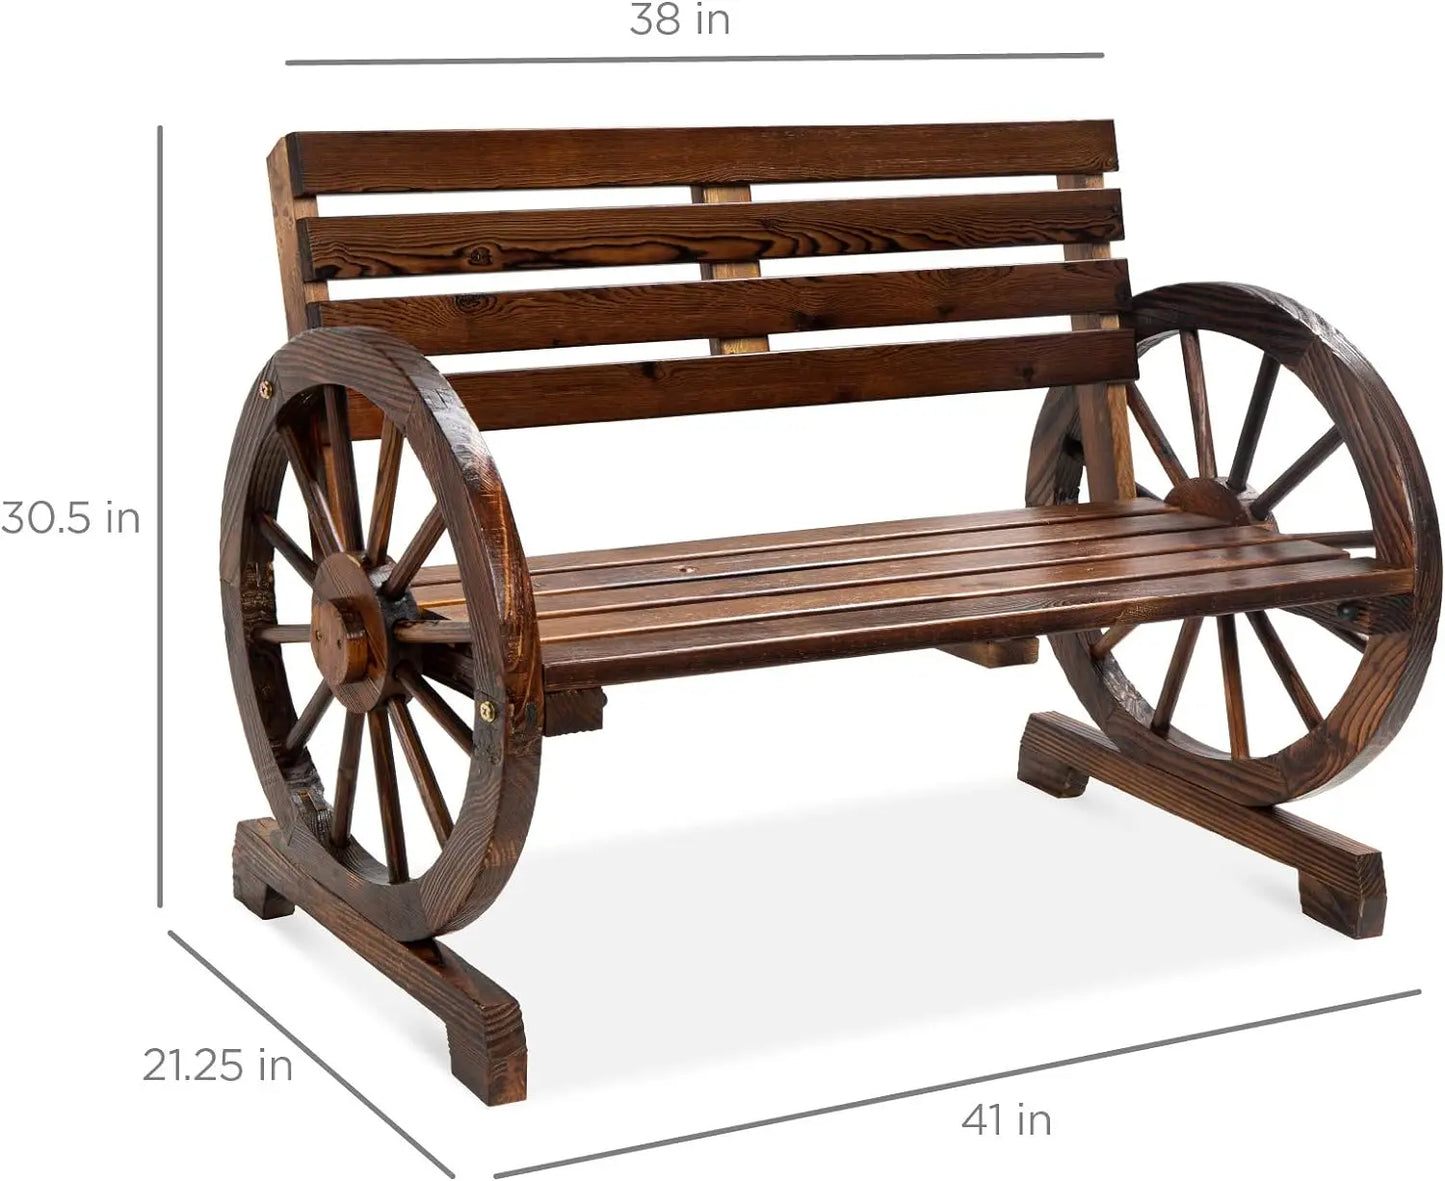 2-Person Wooden Wagon Wheel Bench